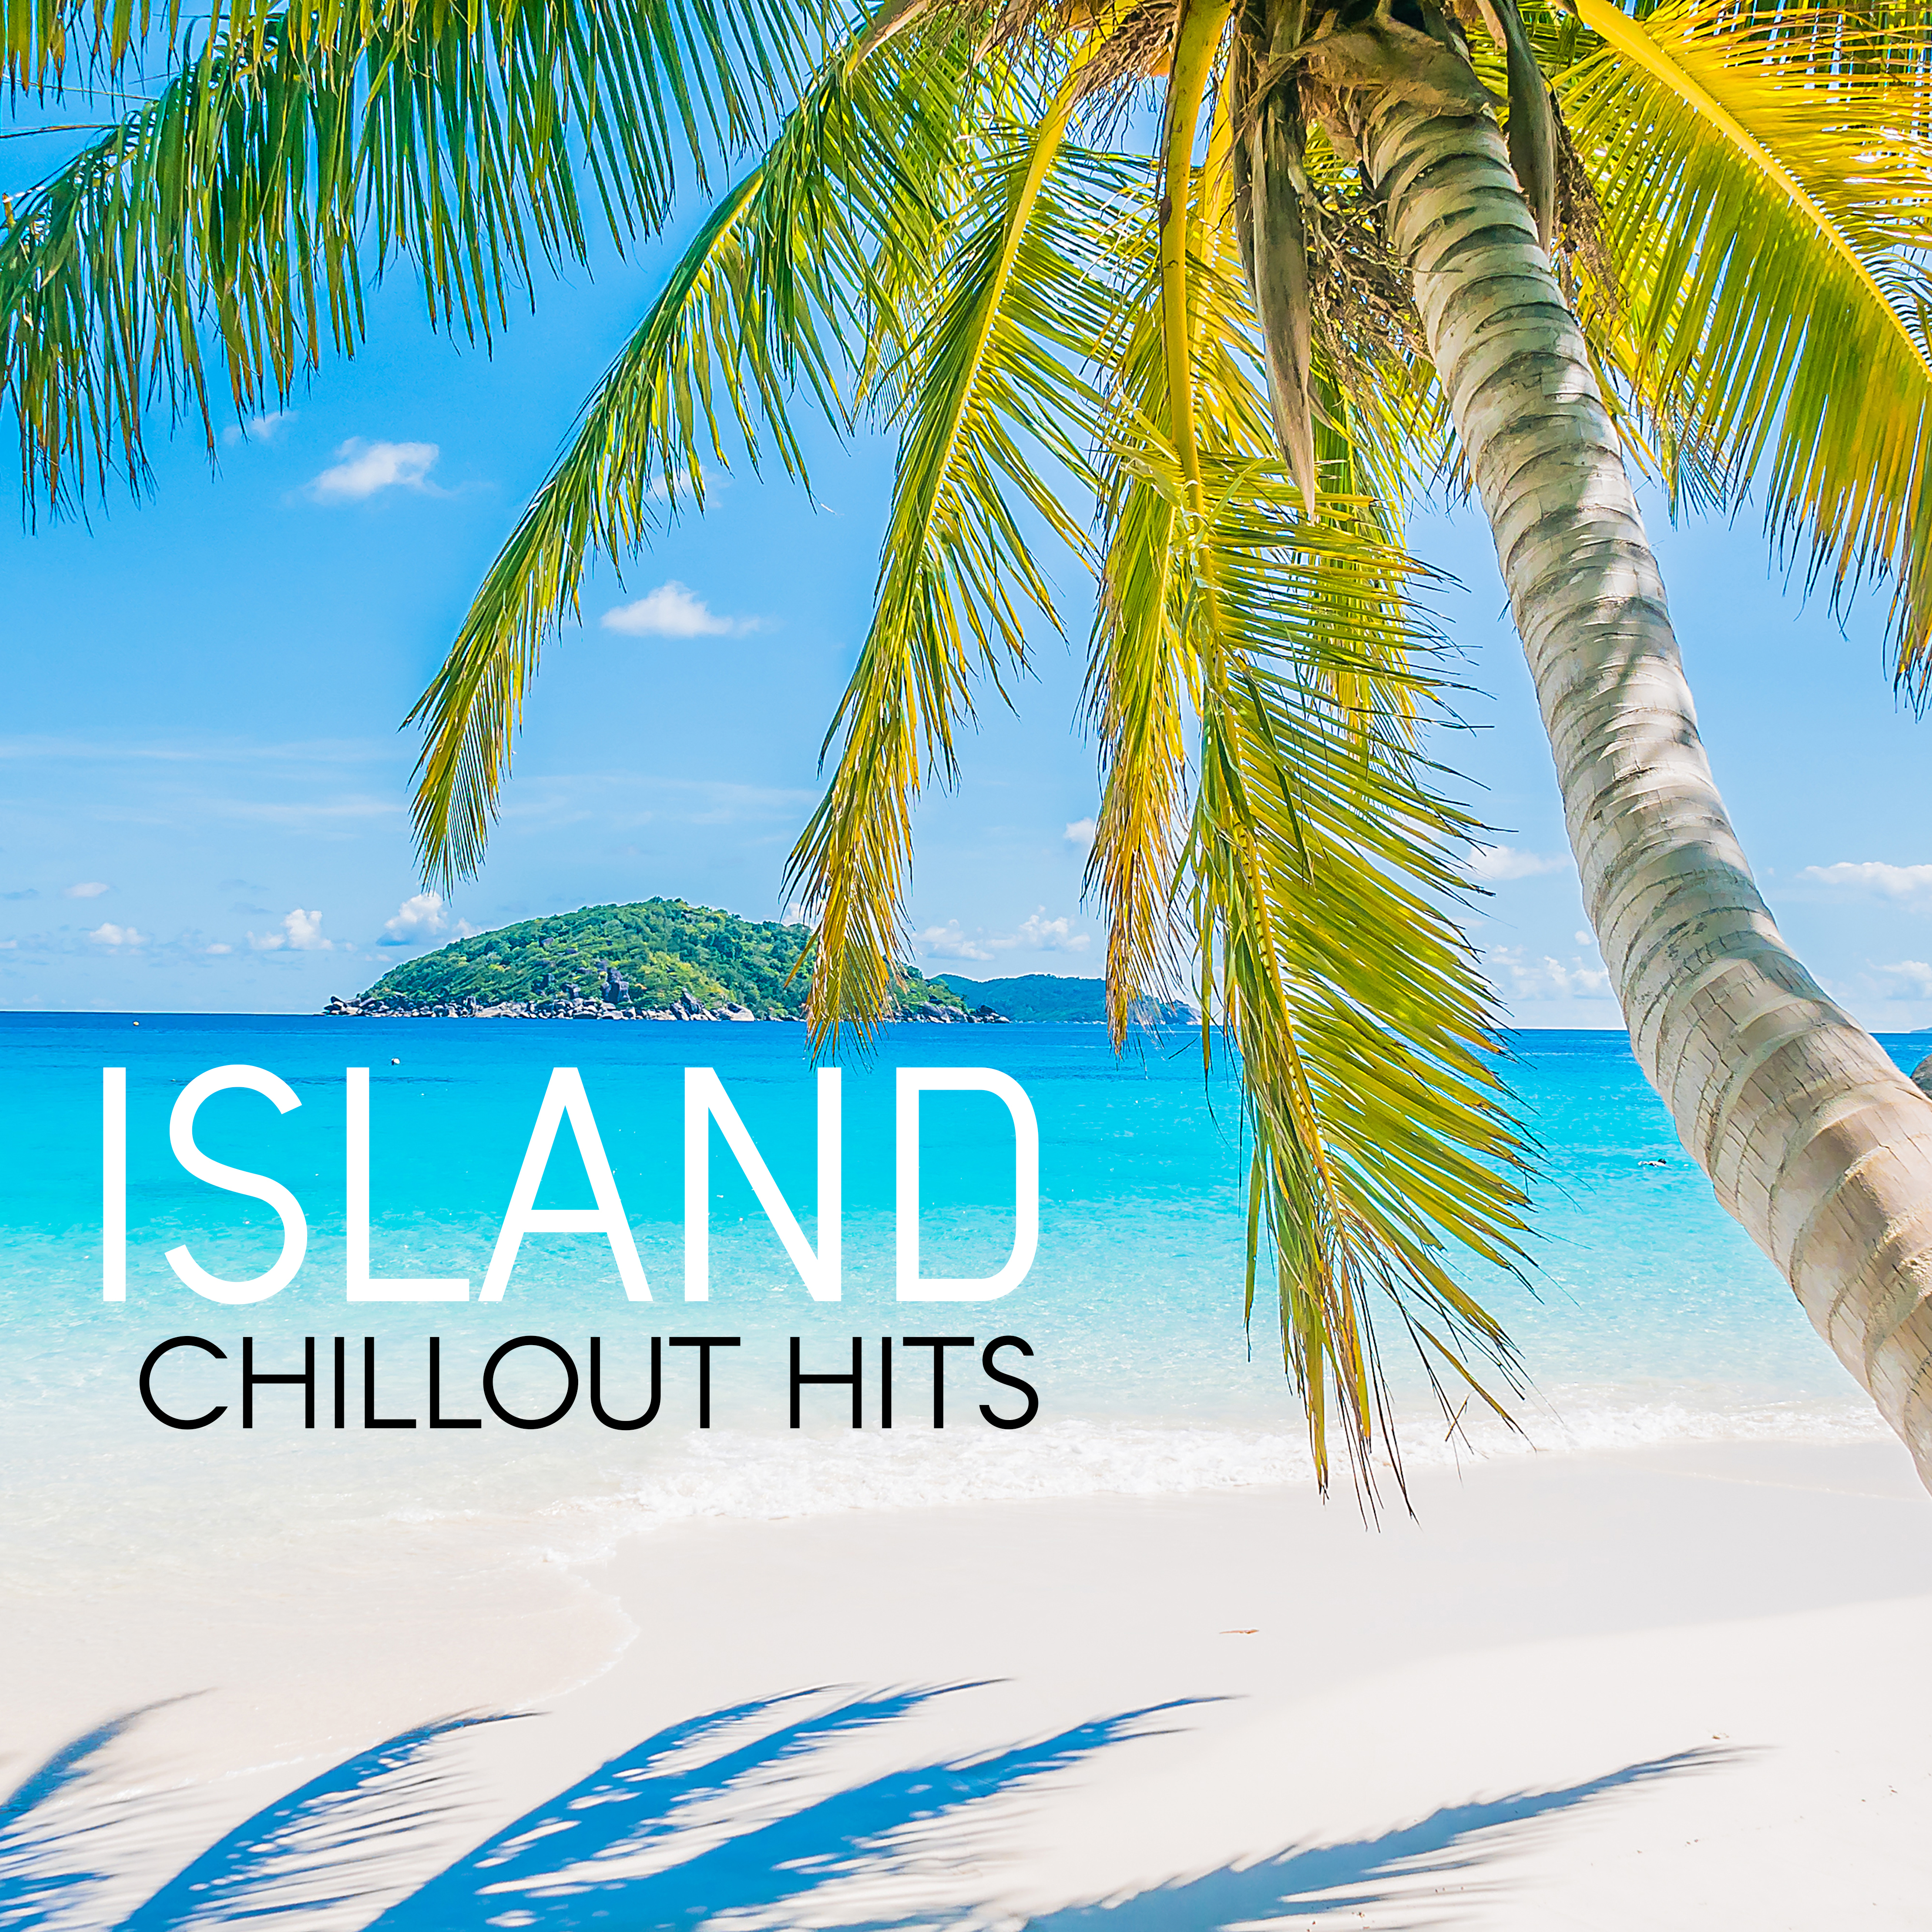 Island Chillout Hits